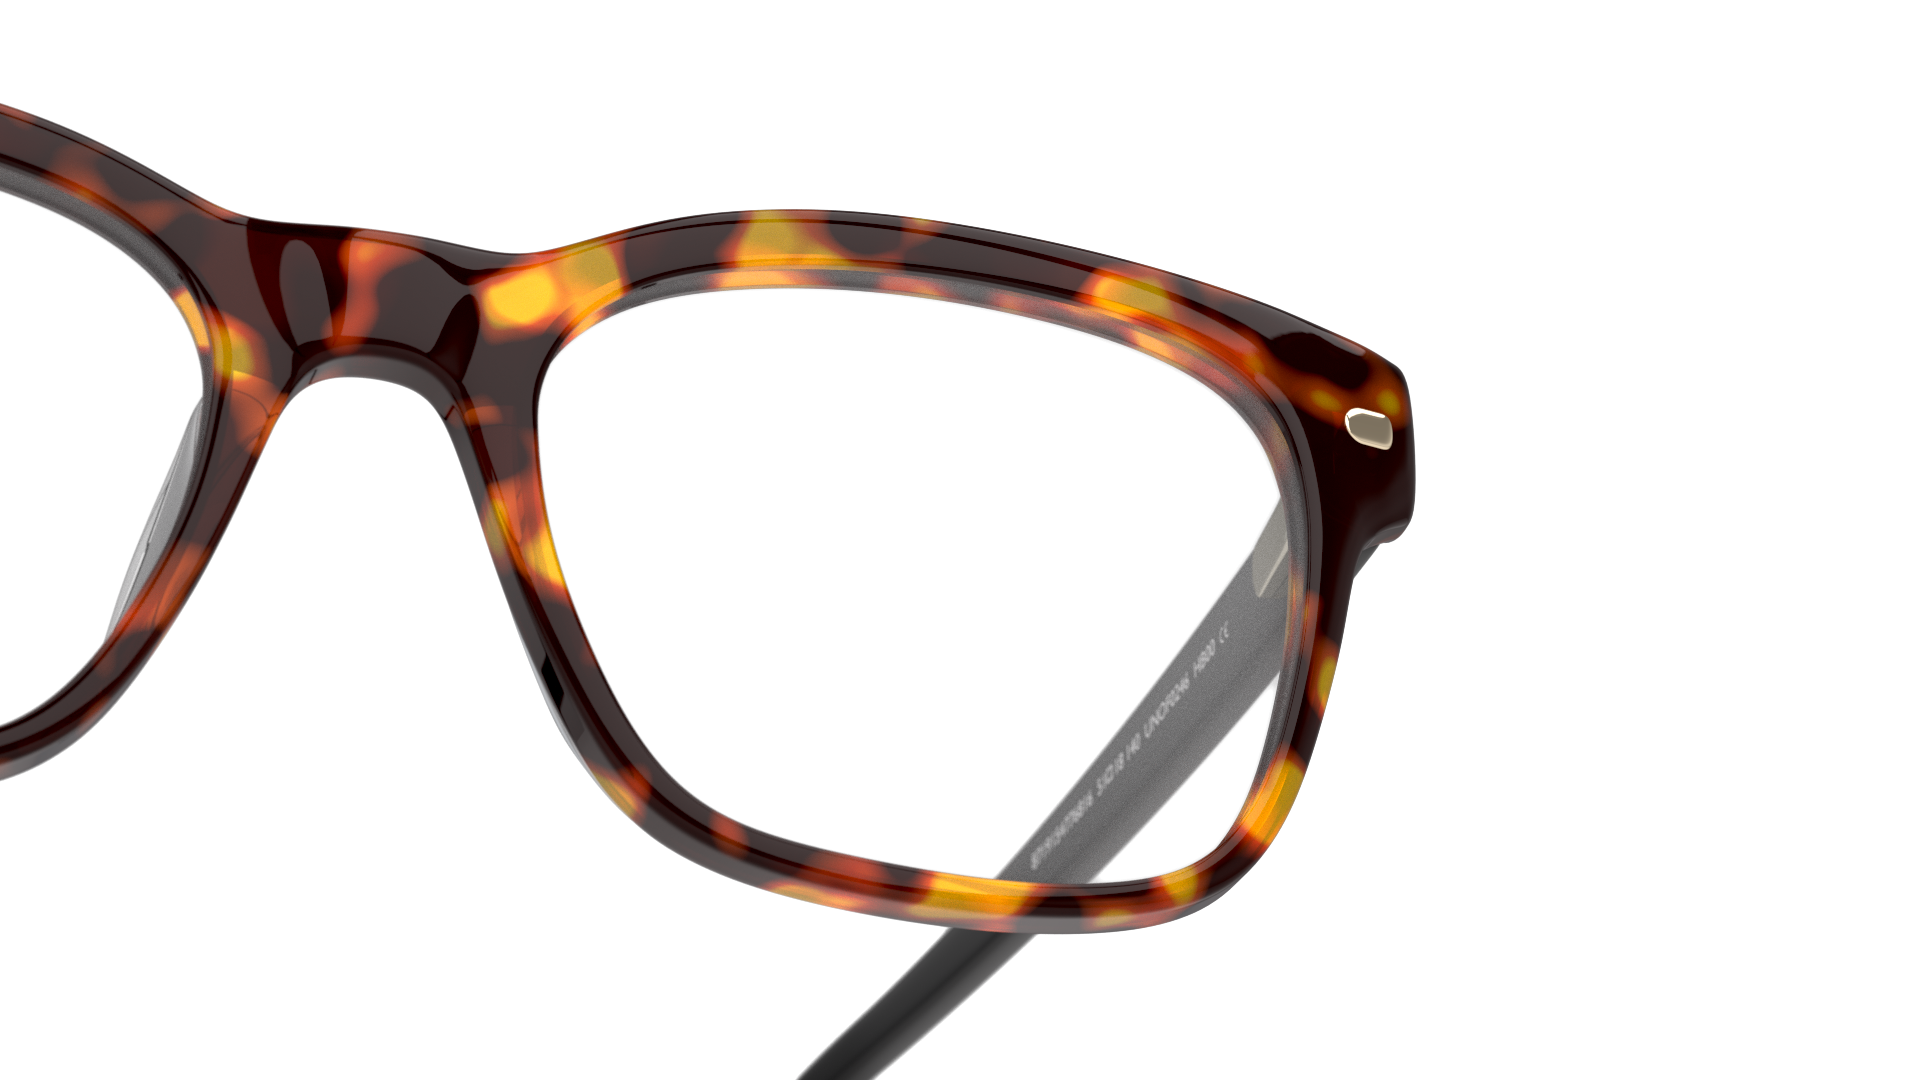 Detail01 Unofficial UNOF0246 (HB00) Glasses Transparent / Tortoise Shell